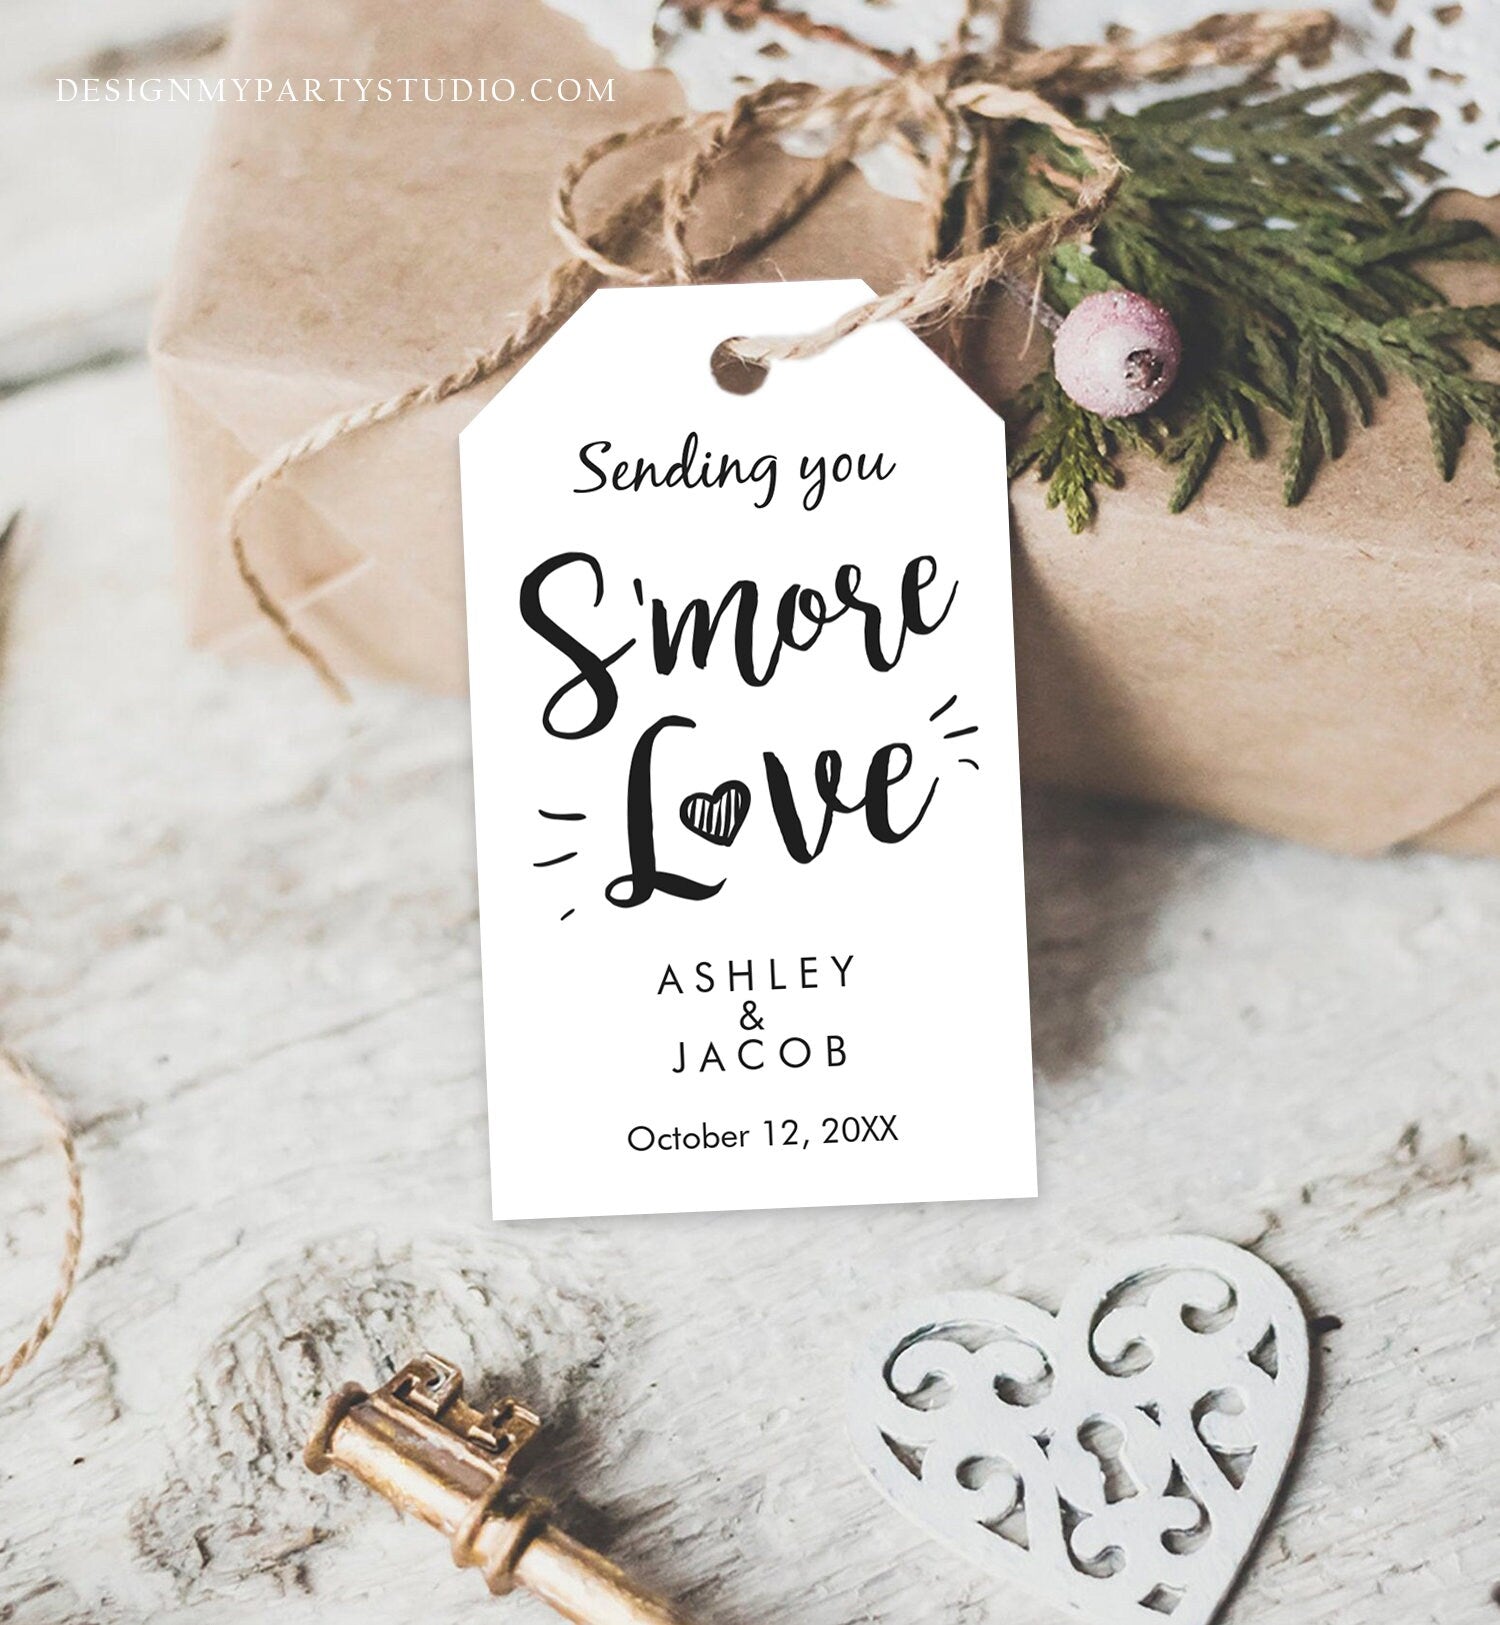 Editable Smore Love tag Template Wedding Favor Tag S'more tags S'mores Gift Tags Rustic Template download Digital PRINTABLE Corjl 0276